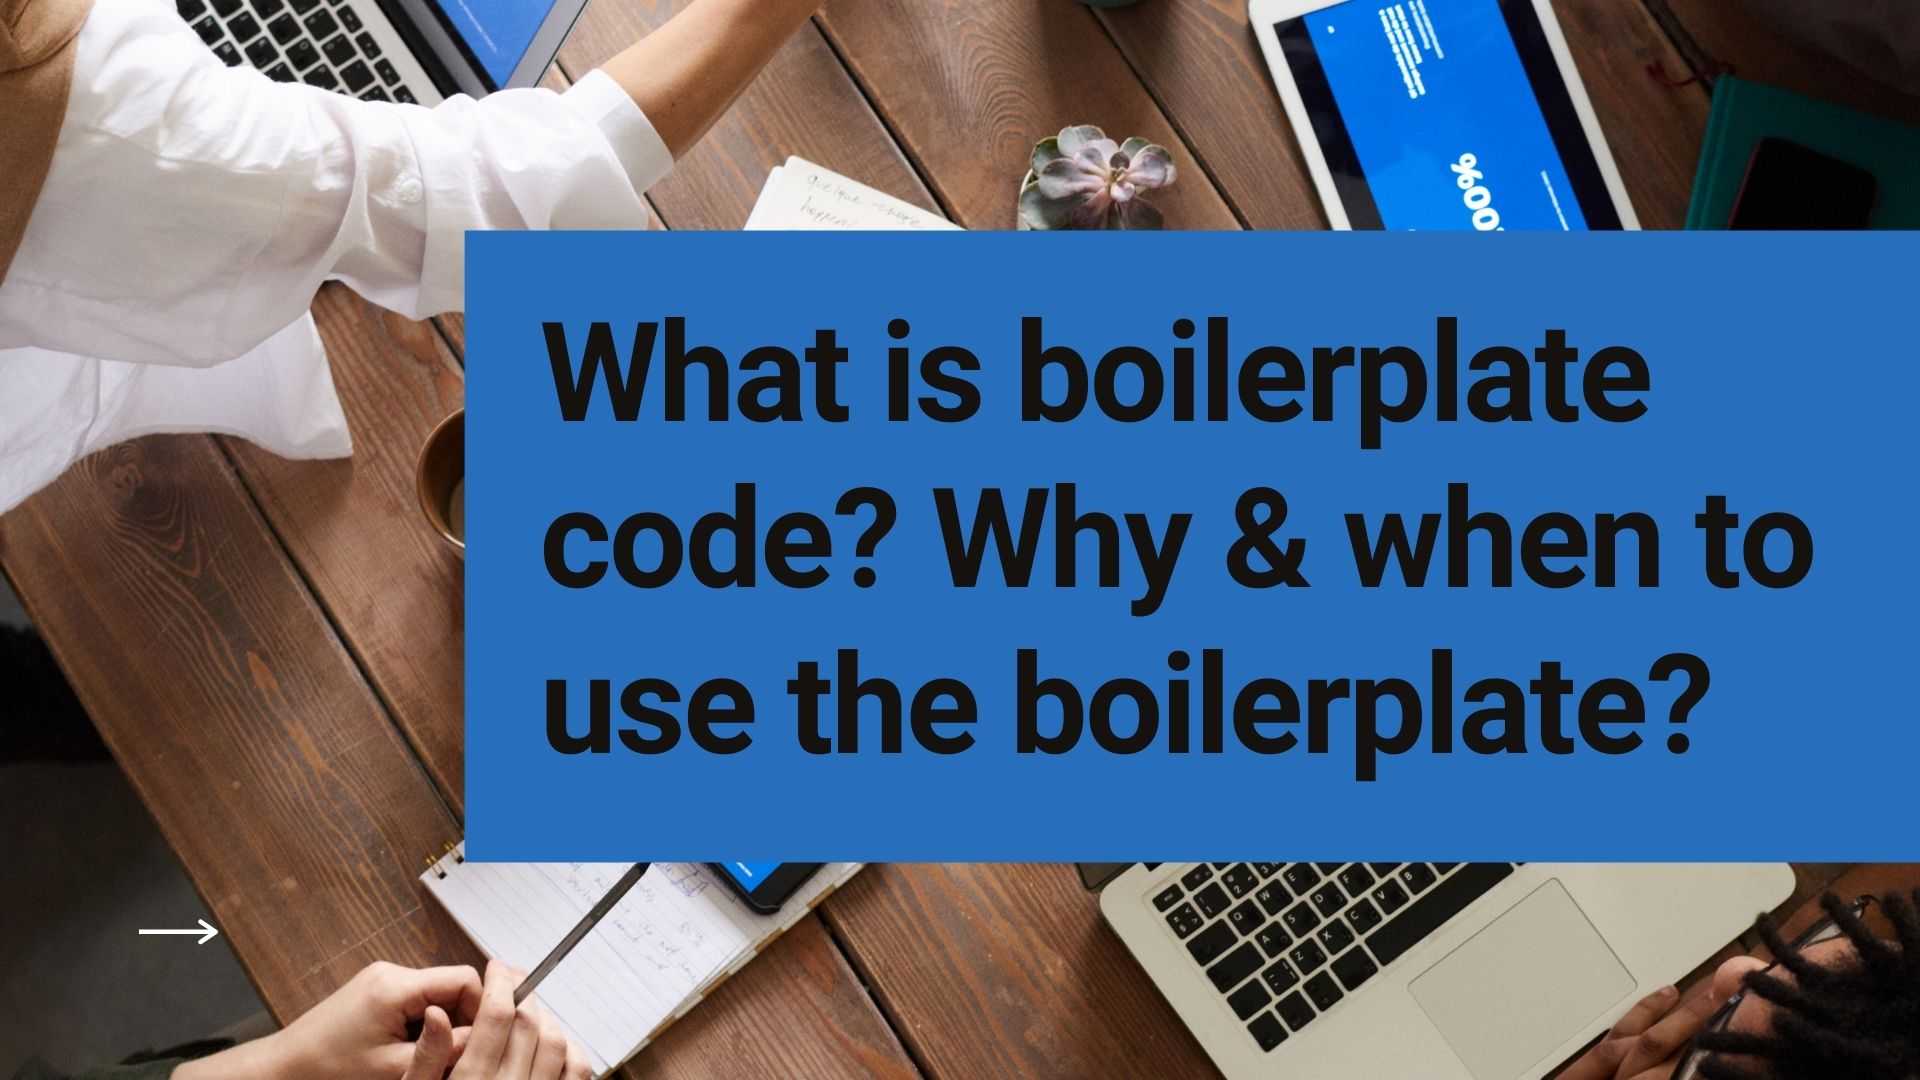 What is boilerplate code? Why & when to use the boilerplate?